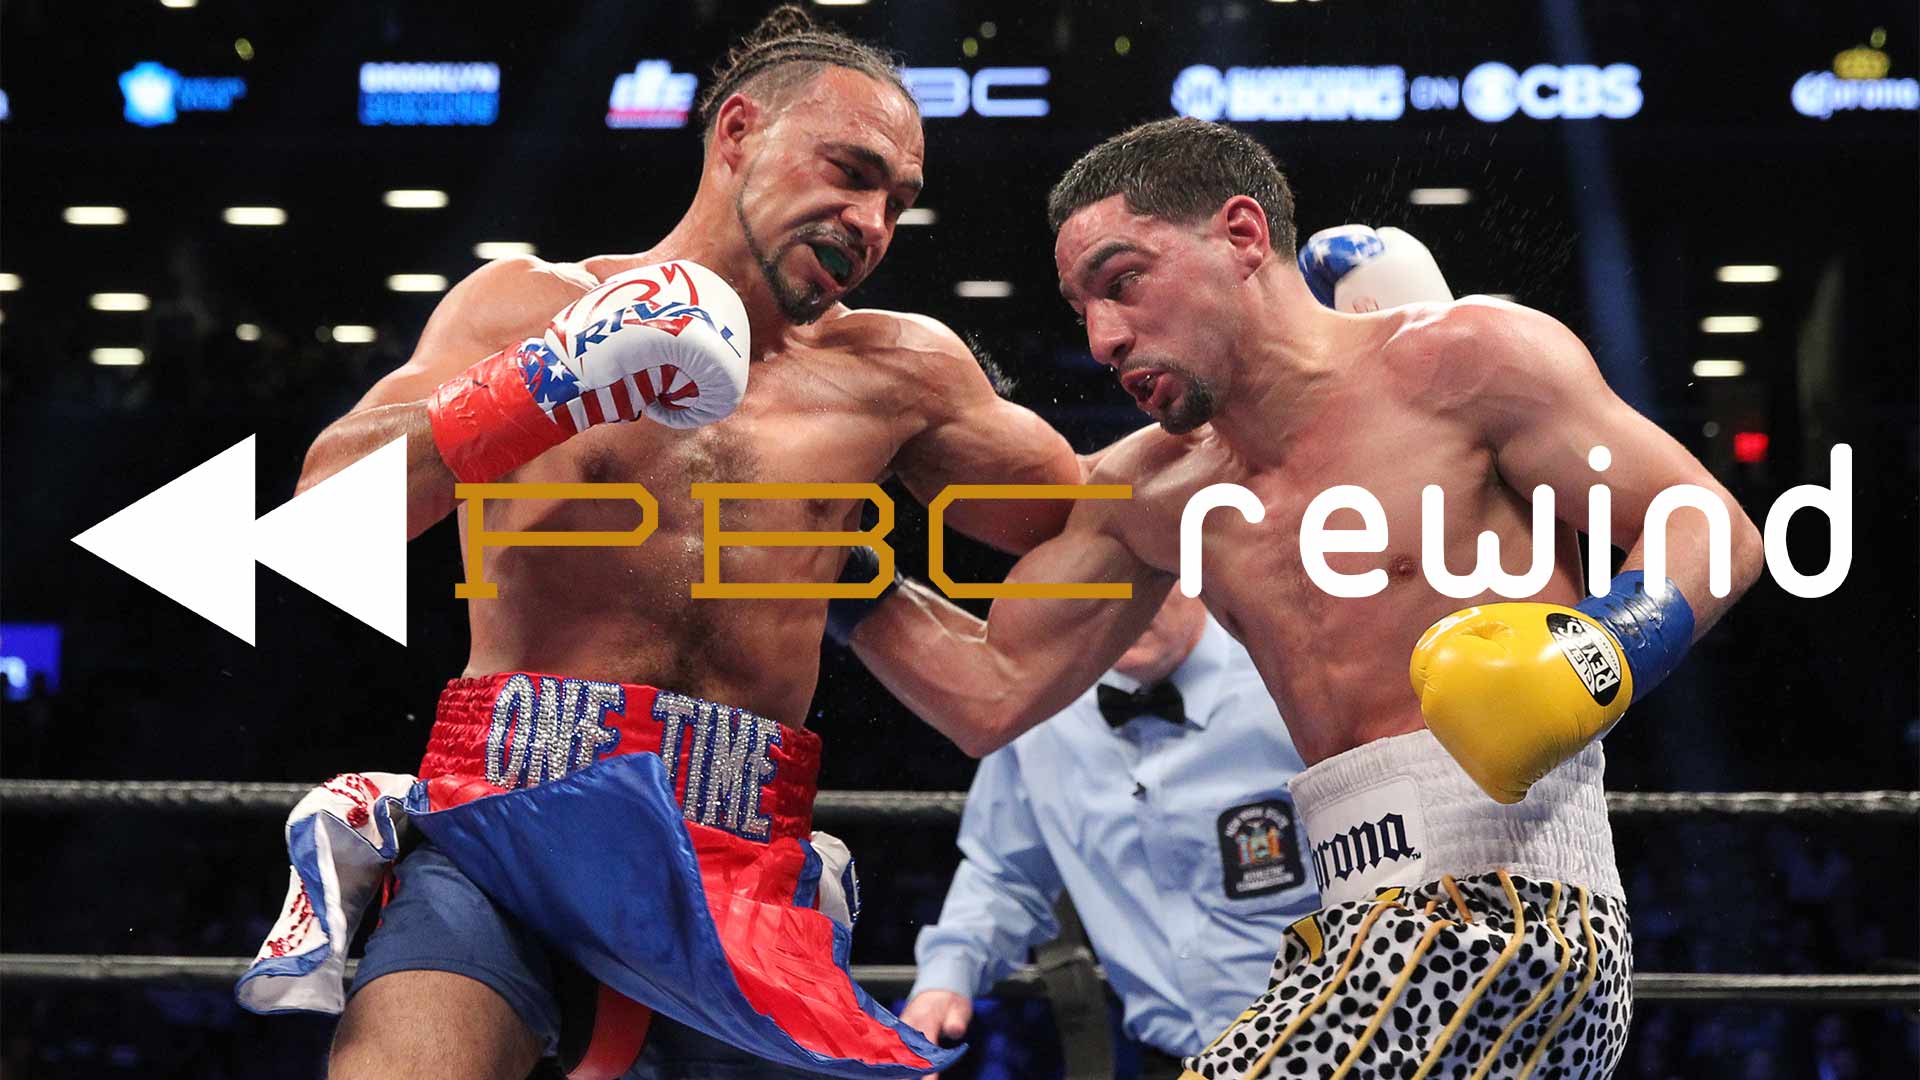 PBC Rewind: March 4, 2017 - Thurman becomes a 147-pound unified champion1920 x 1080